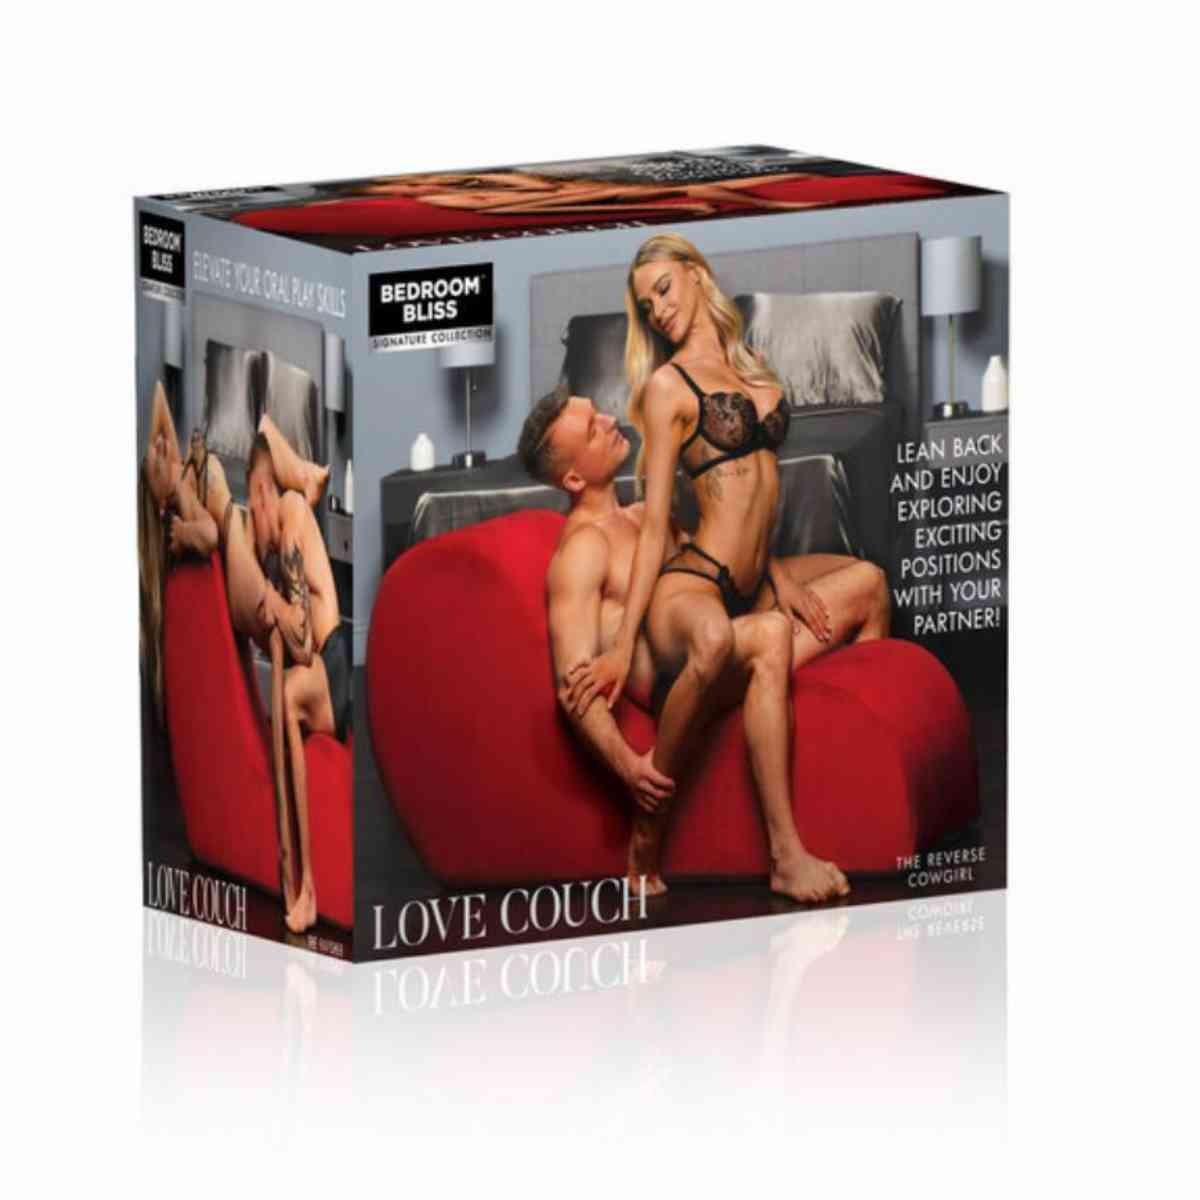 Verpackung Liebescouch rot